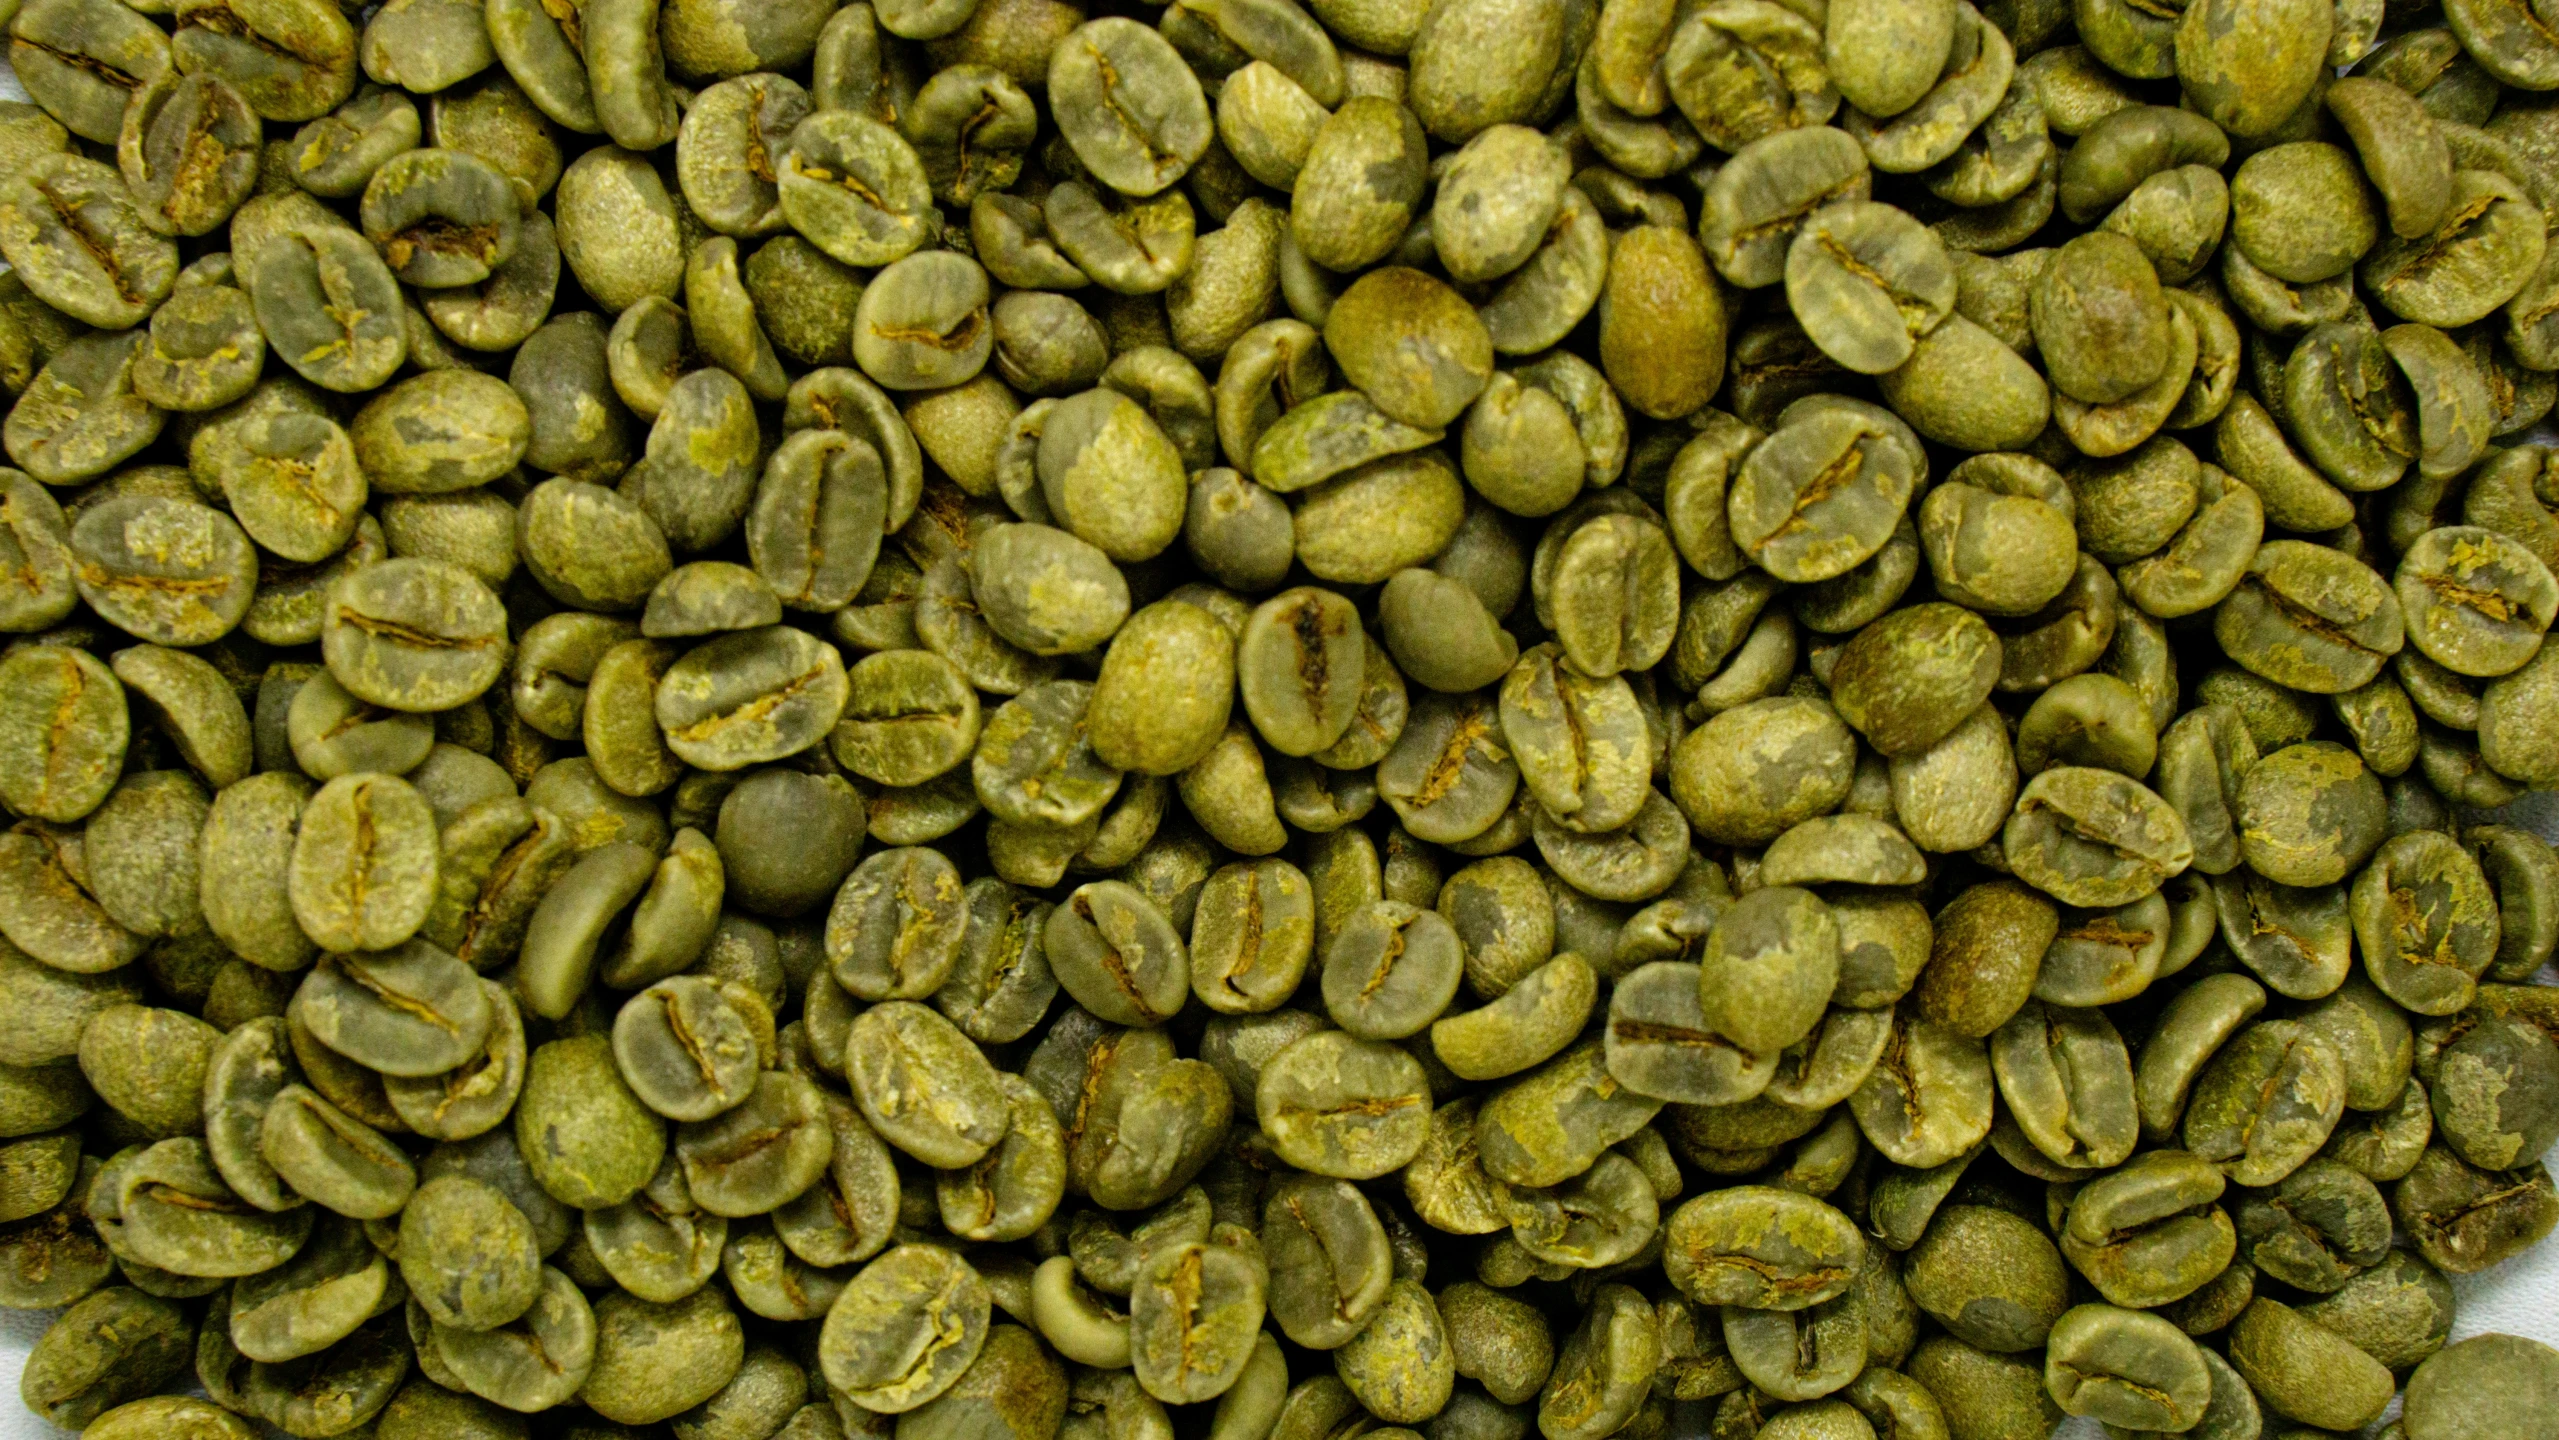 green beans have been roasted and displayed on a white background